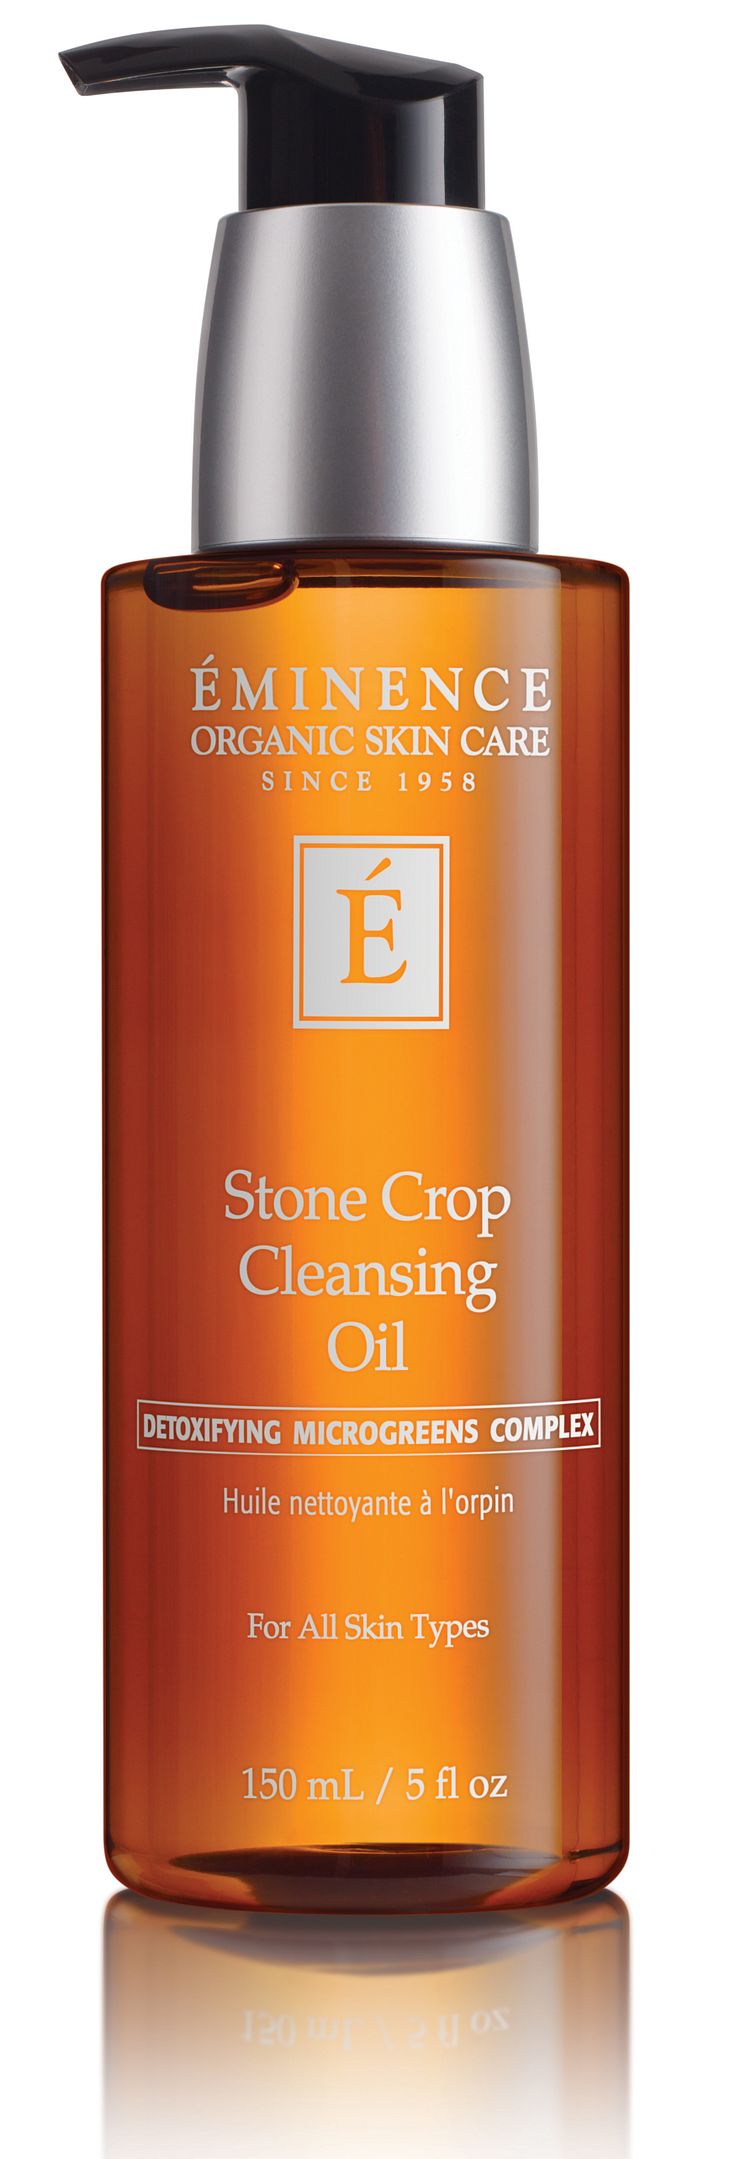 Éminence Stonecrop Cleansing oil